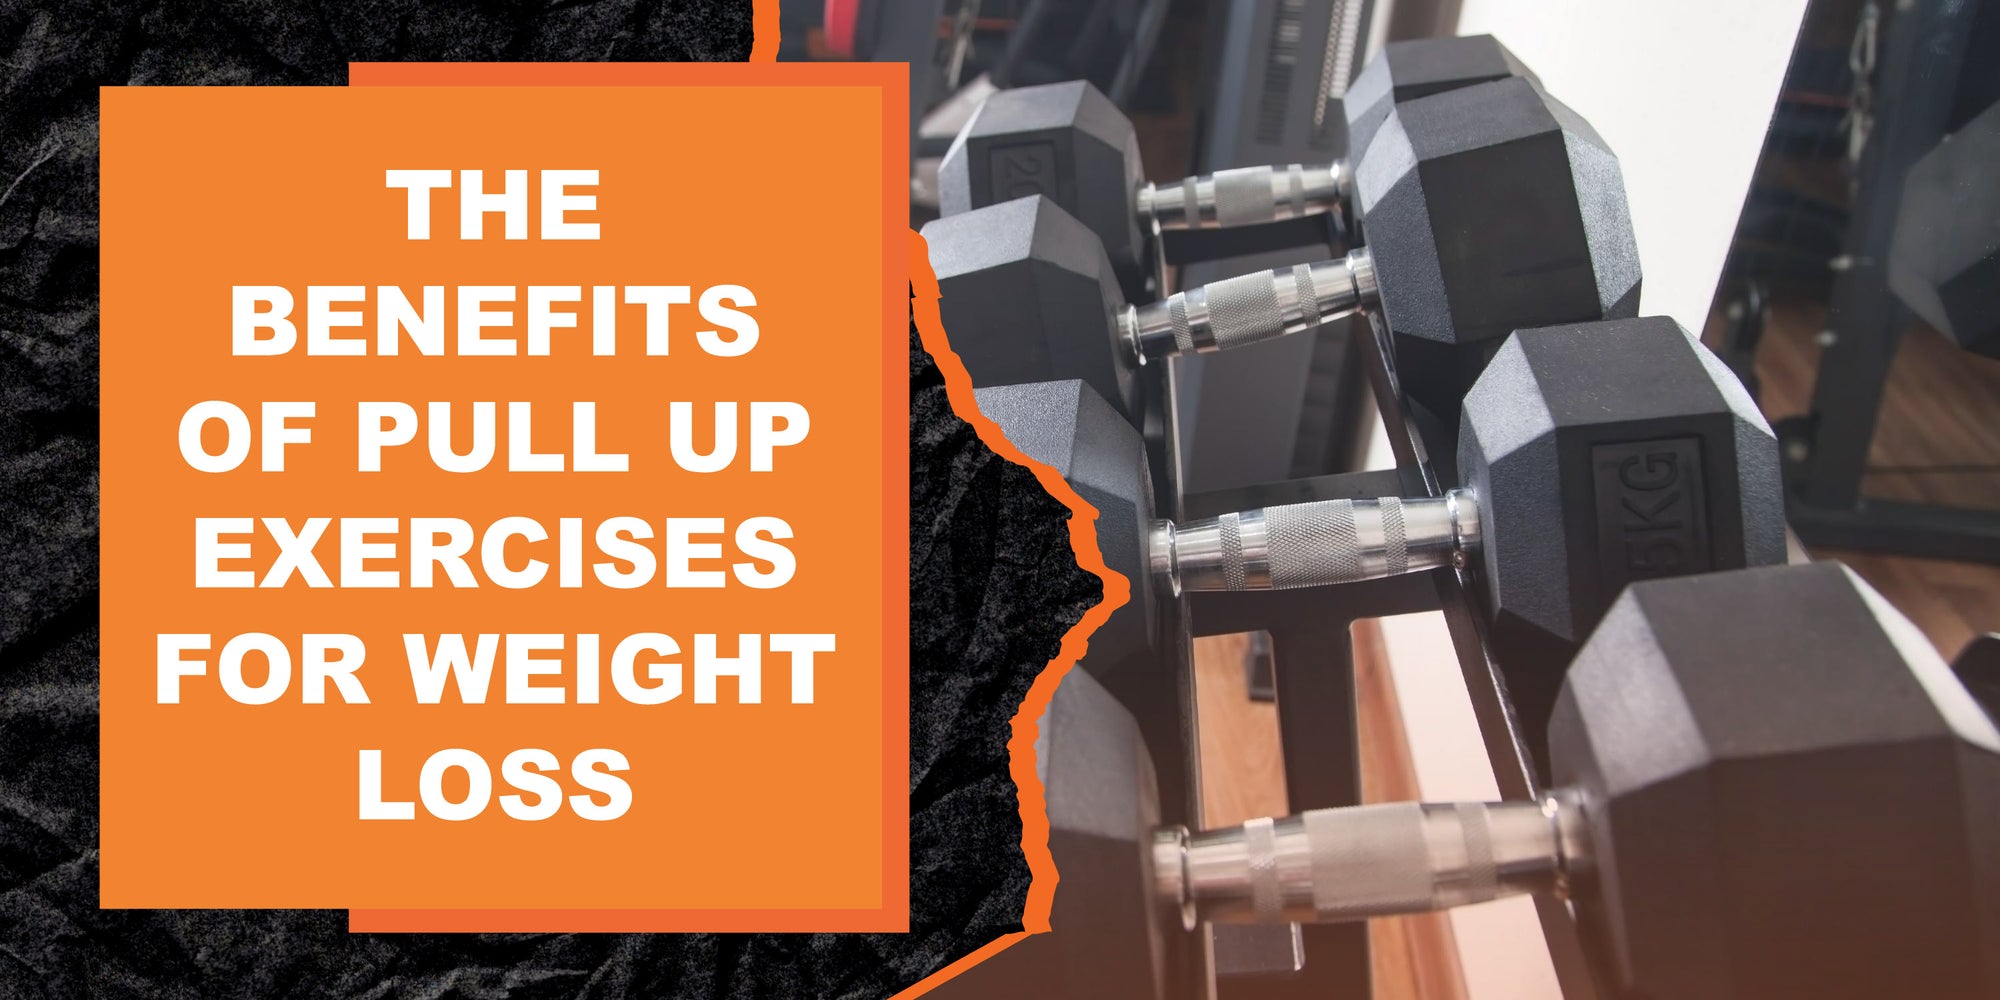 The Benefits of Pull Up Exercises for Weight Loss